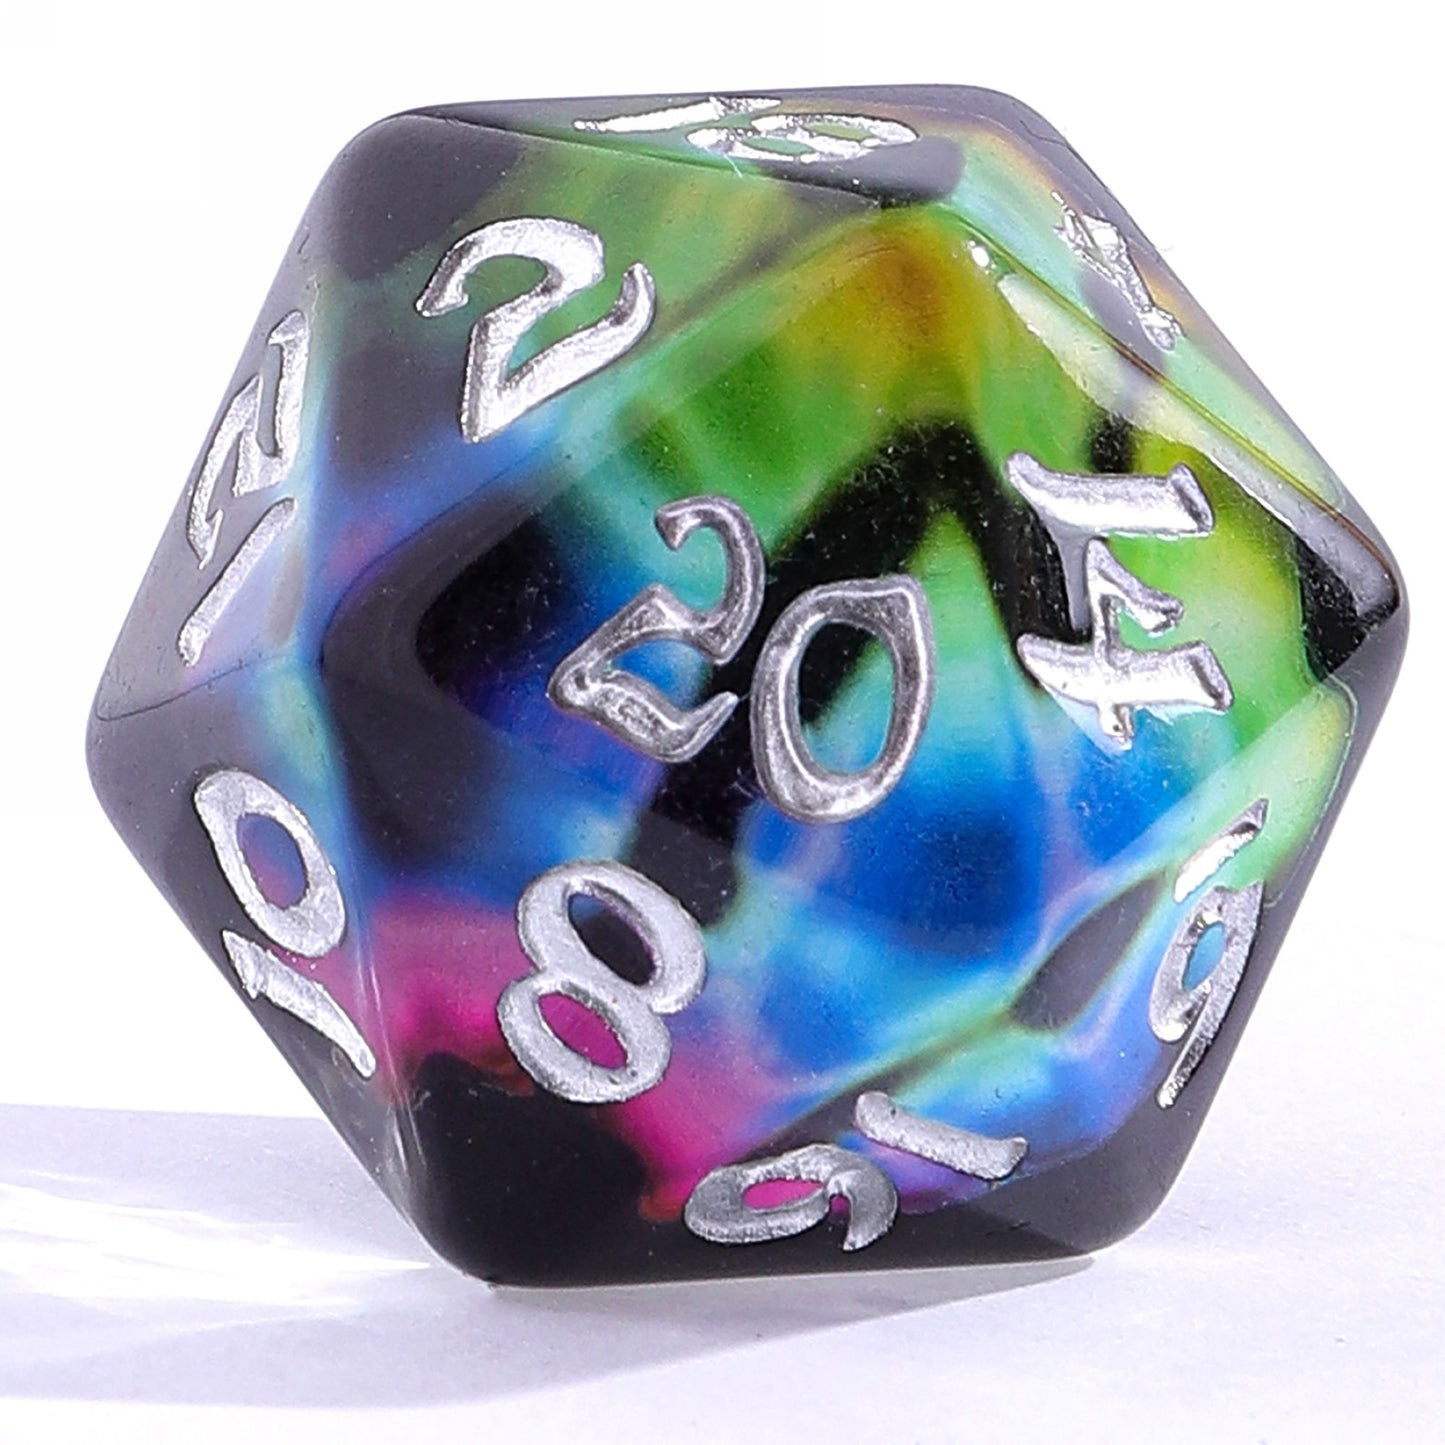 Wyrmforged Rollers Rounded Edge Resin Dragon's Eye Dice Set-Chromatic